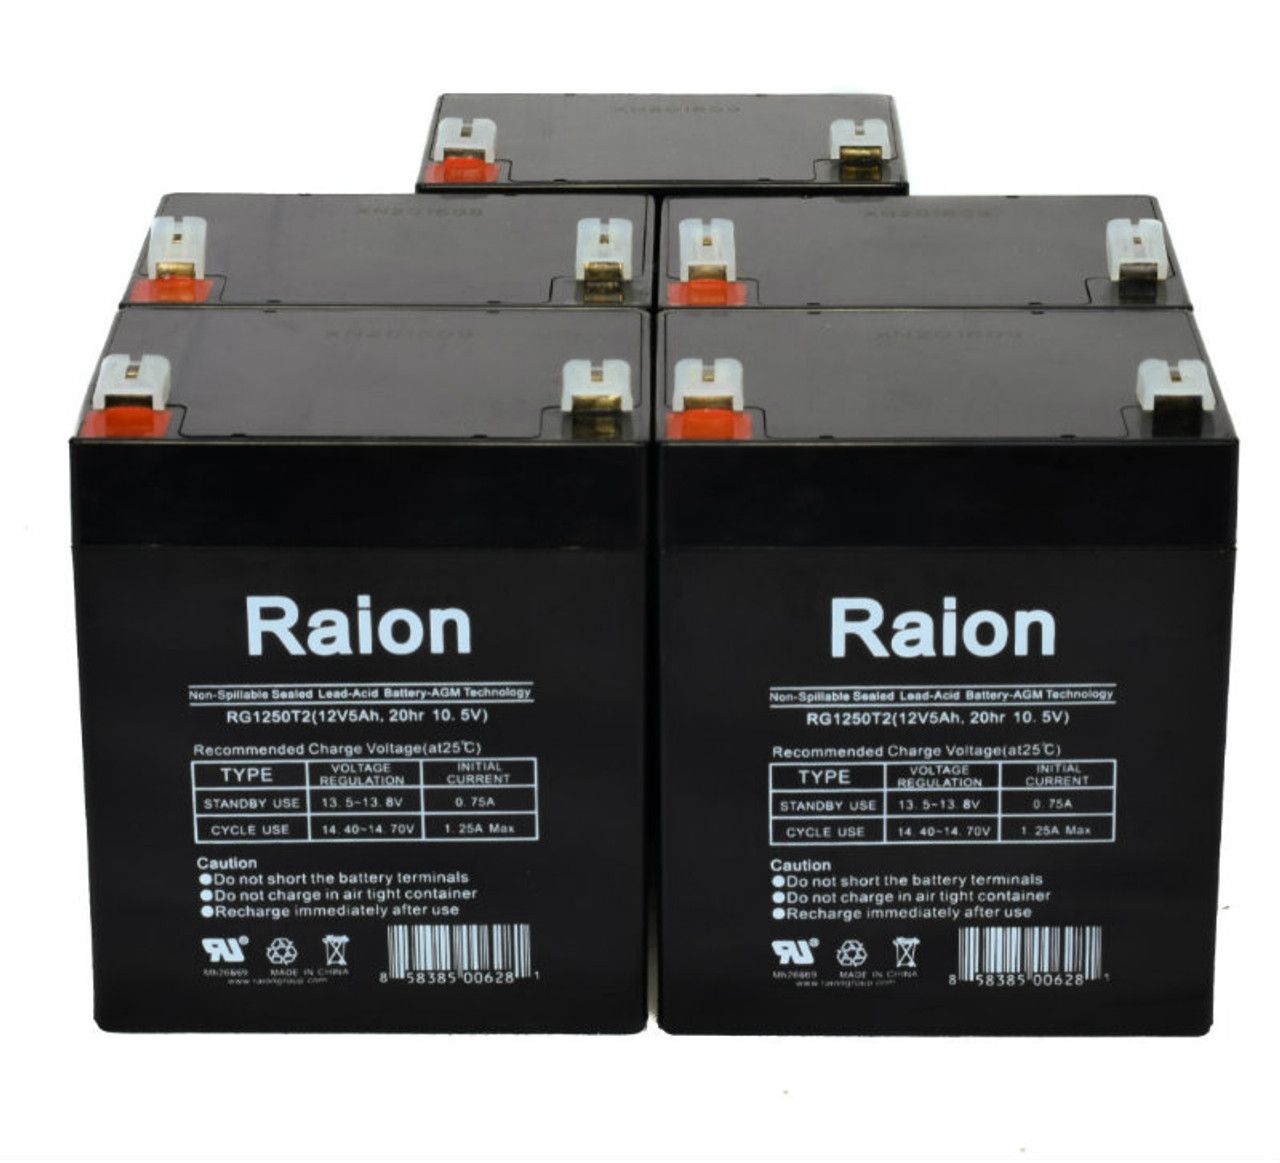 Raion Power 12V 5Ah RG1250T2 Replacement Lead Acid Battery for Narada 6-FM-4 - 5 Pack